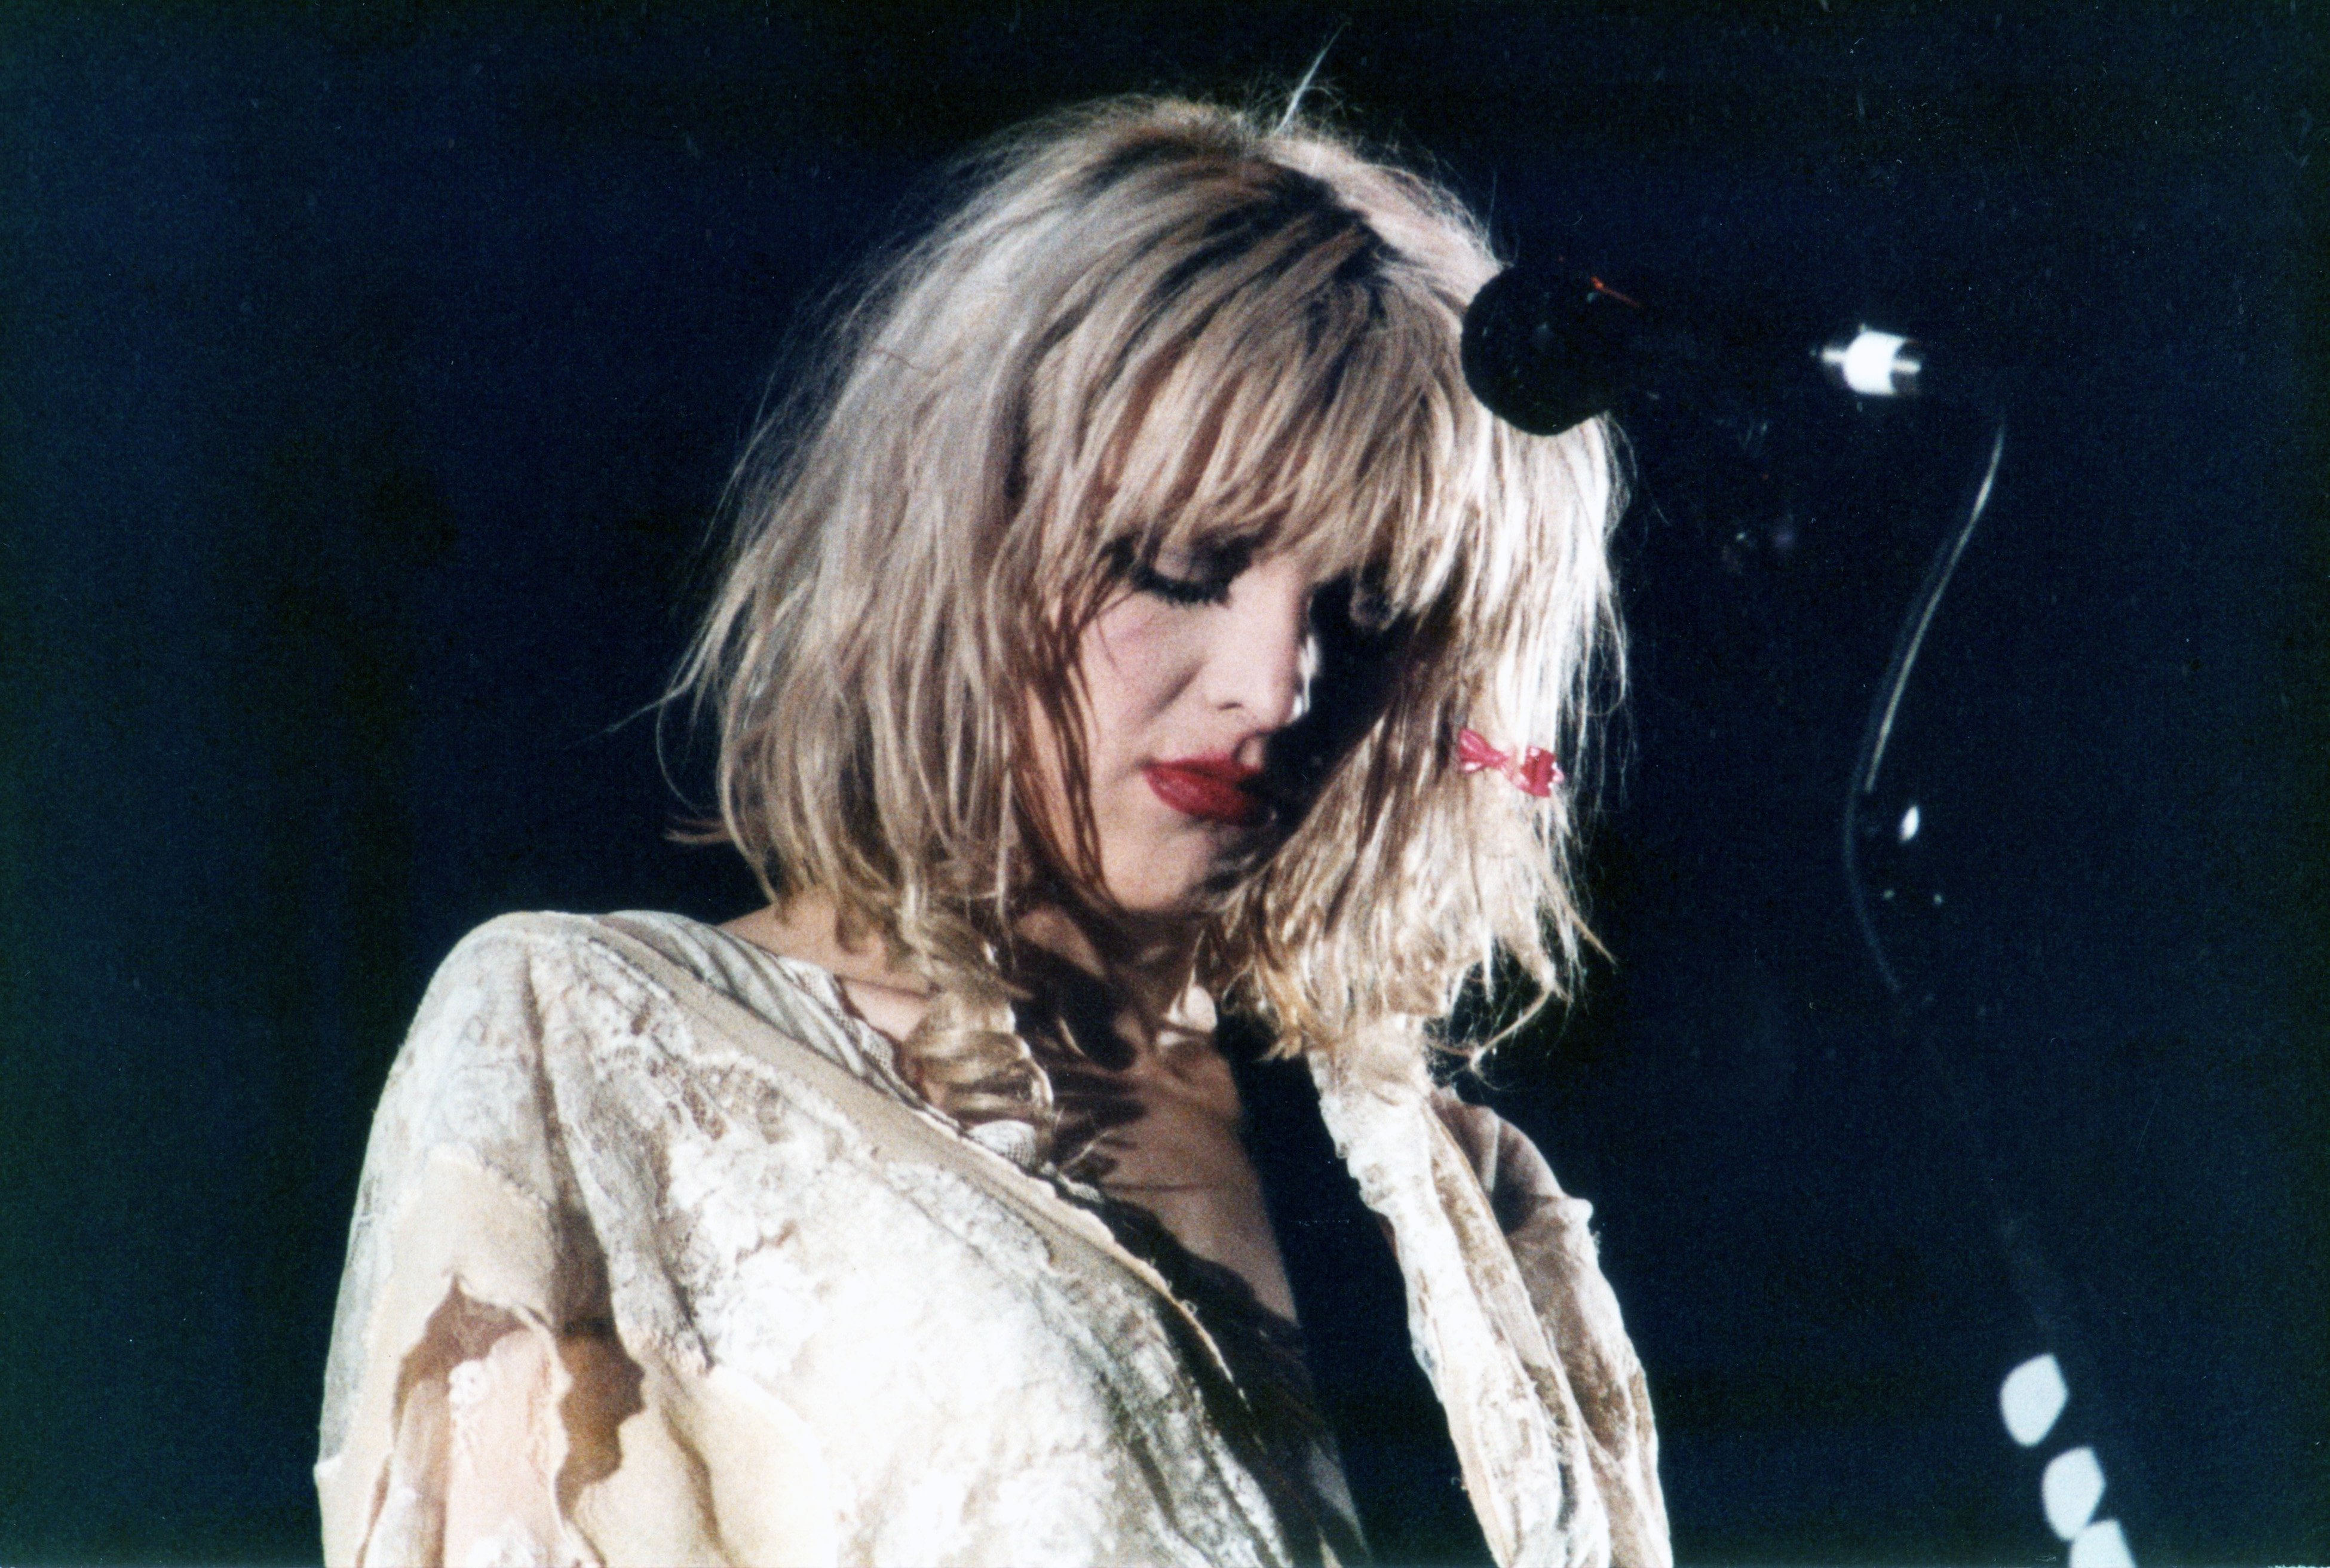 Courtney Love performing at First Ave in Minneapolis in 1994